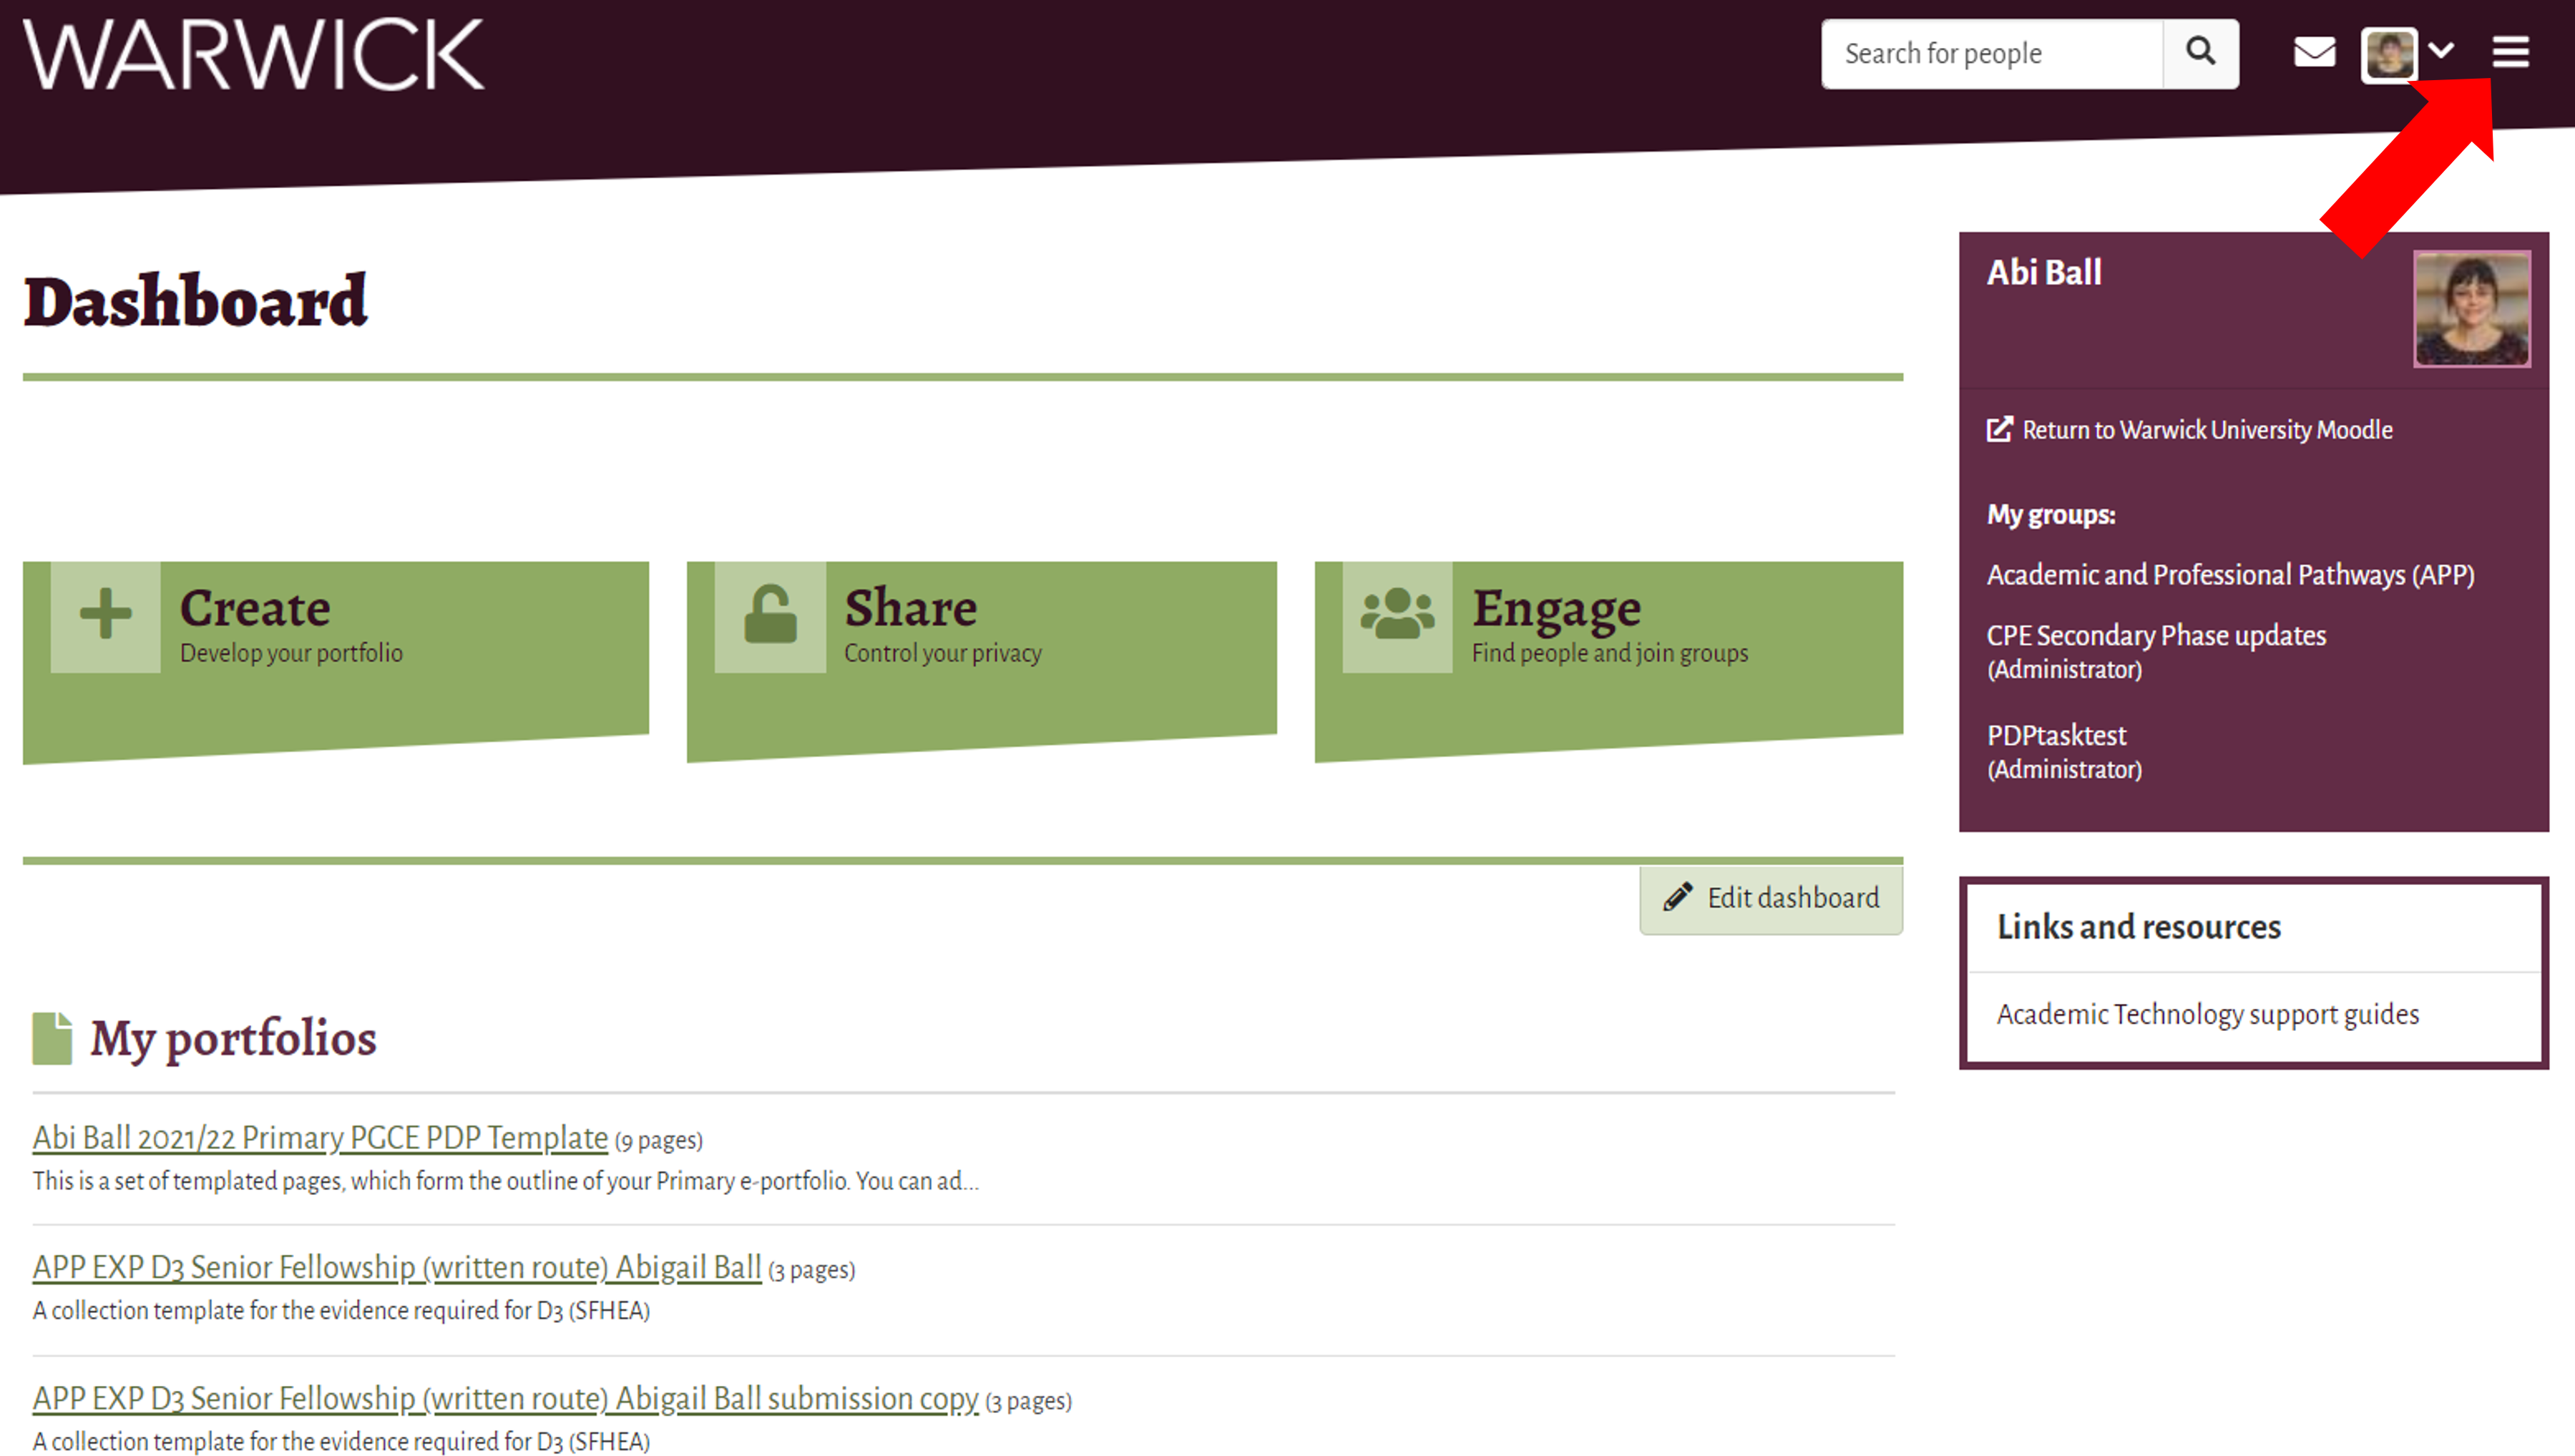 Mahara dashboard screenshot showing the create, share and engage buttons and the location of the main menu